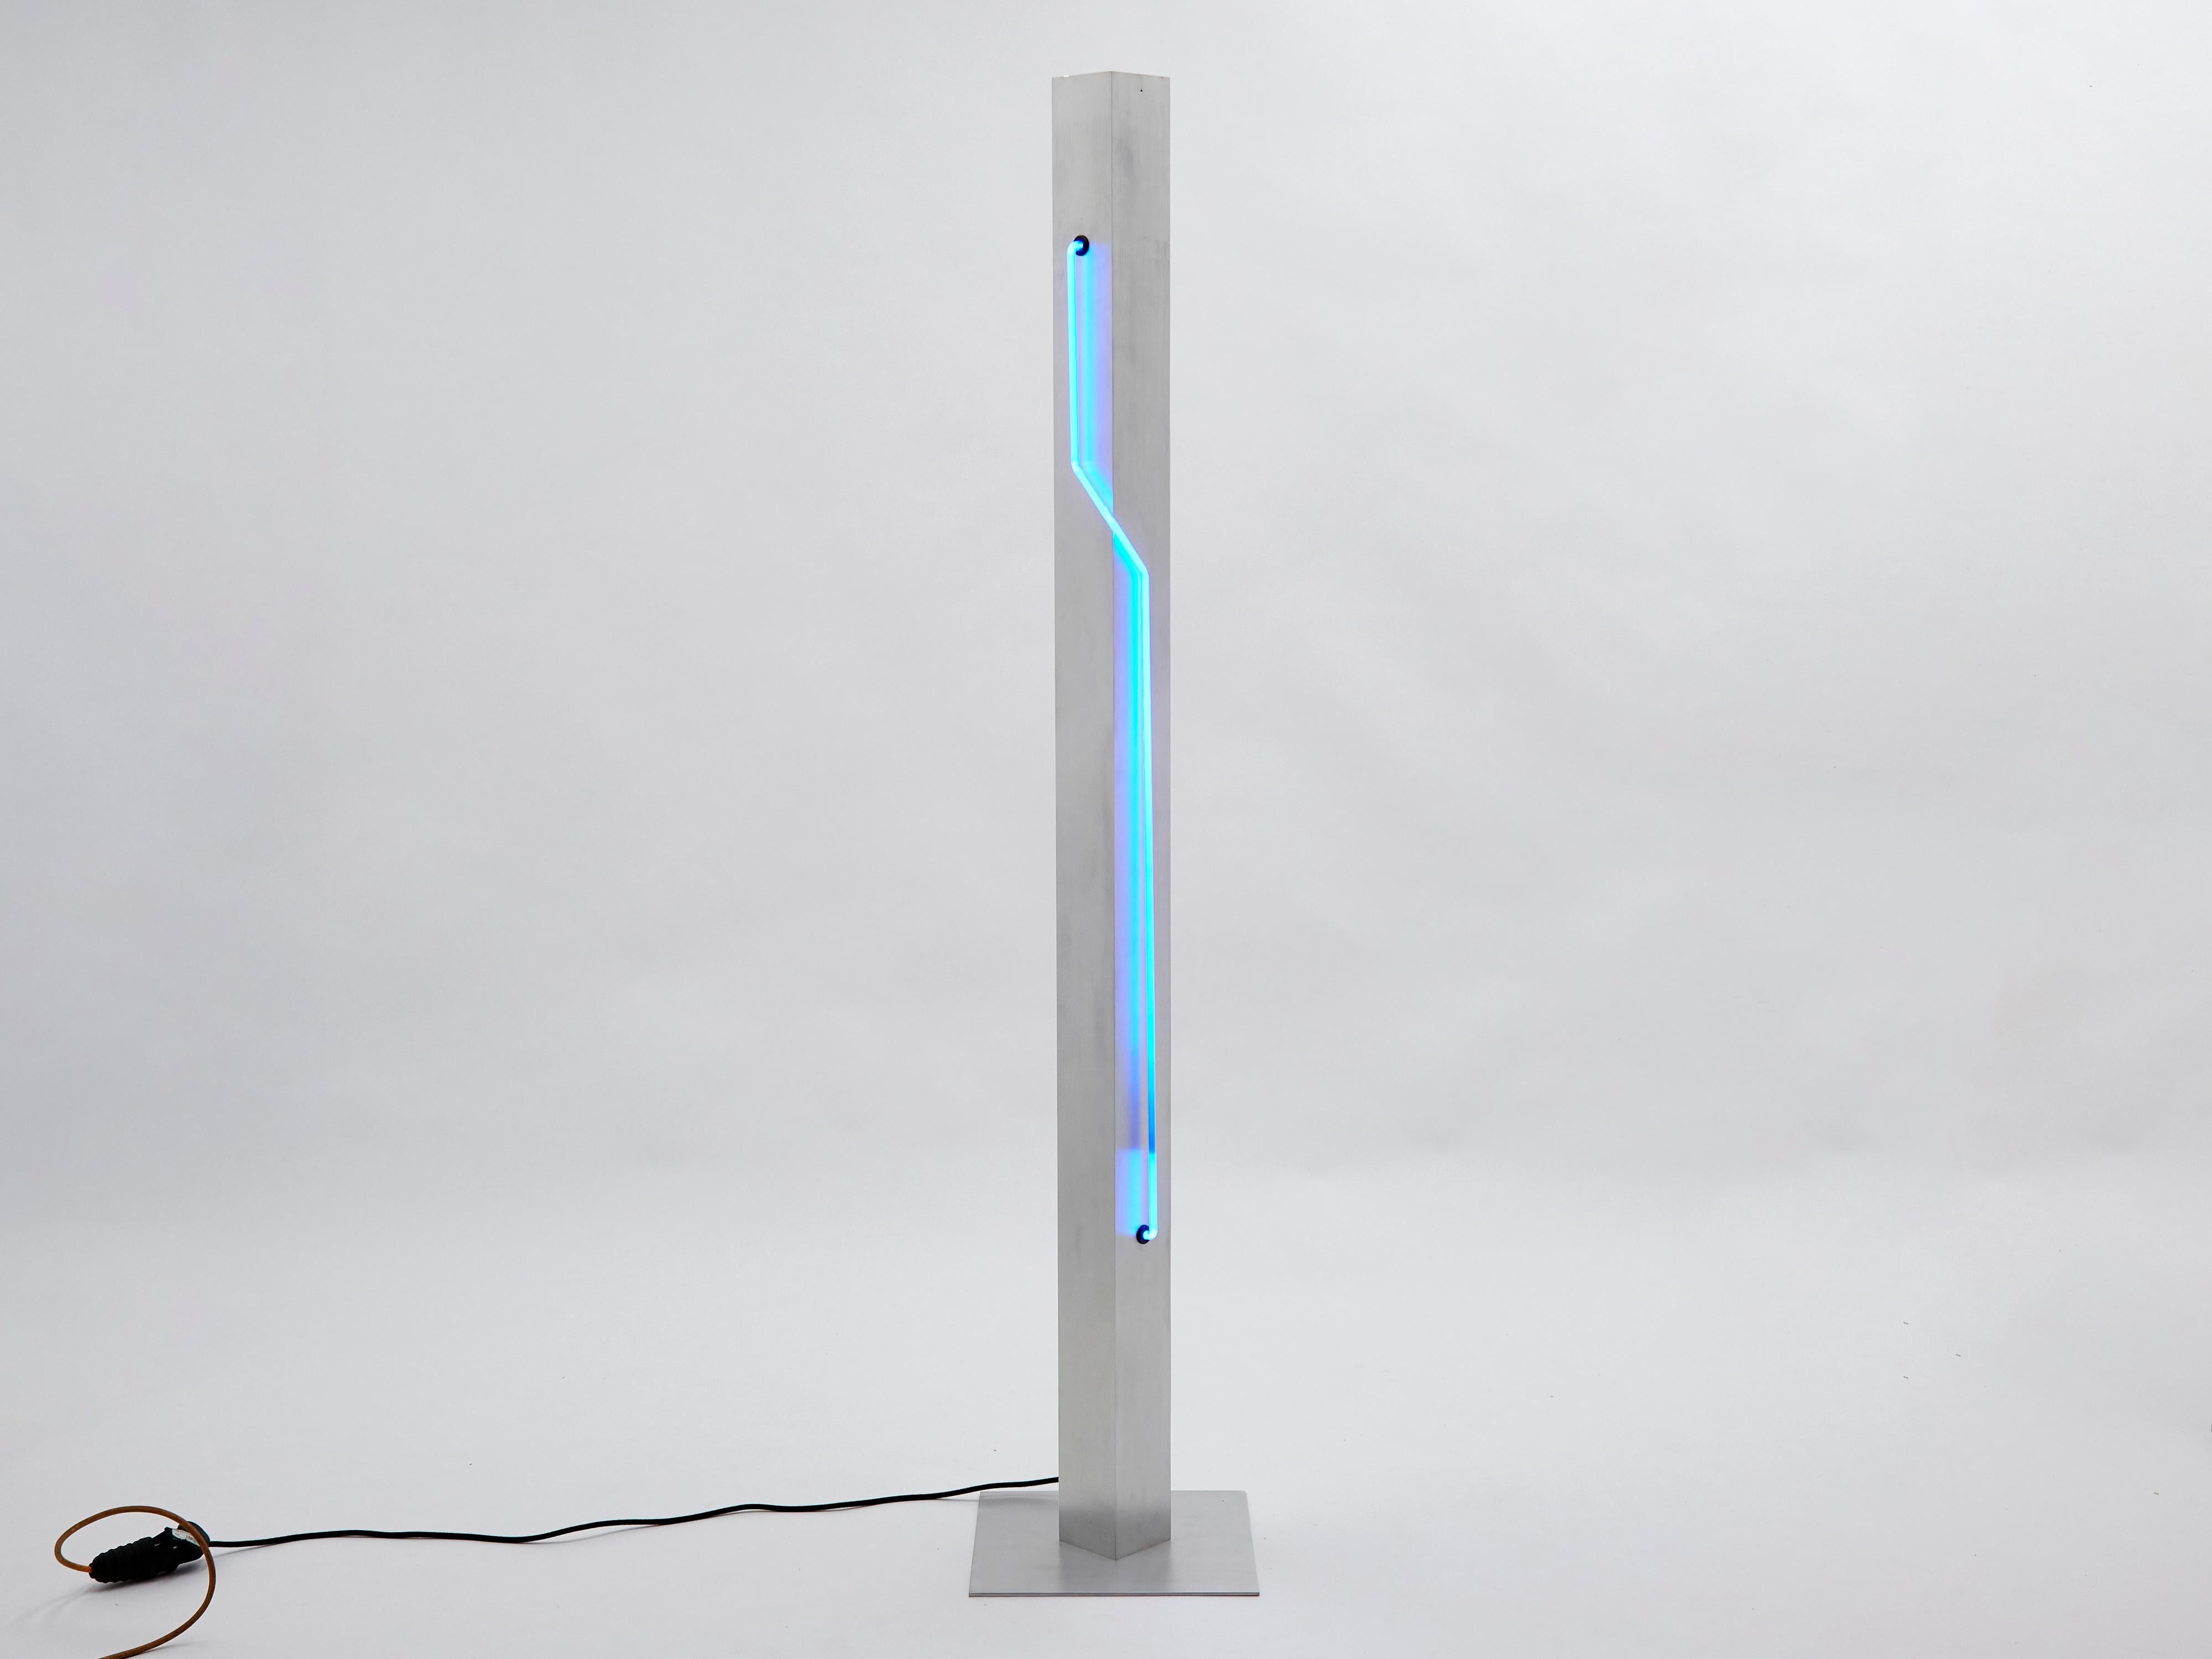 Post-Modern totem blue neon light designed by Rudi Stern and Dan Chelsea for the New-York gallery Let There Be Neon in 1983, with lighting elements provided by George Kovacs. The central column in brushed stainless steel is four inches wide and